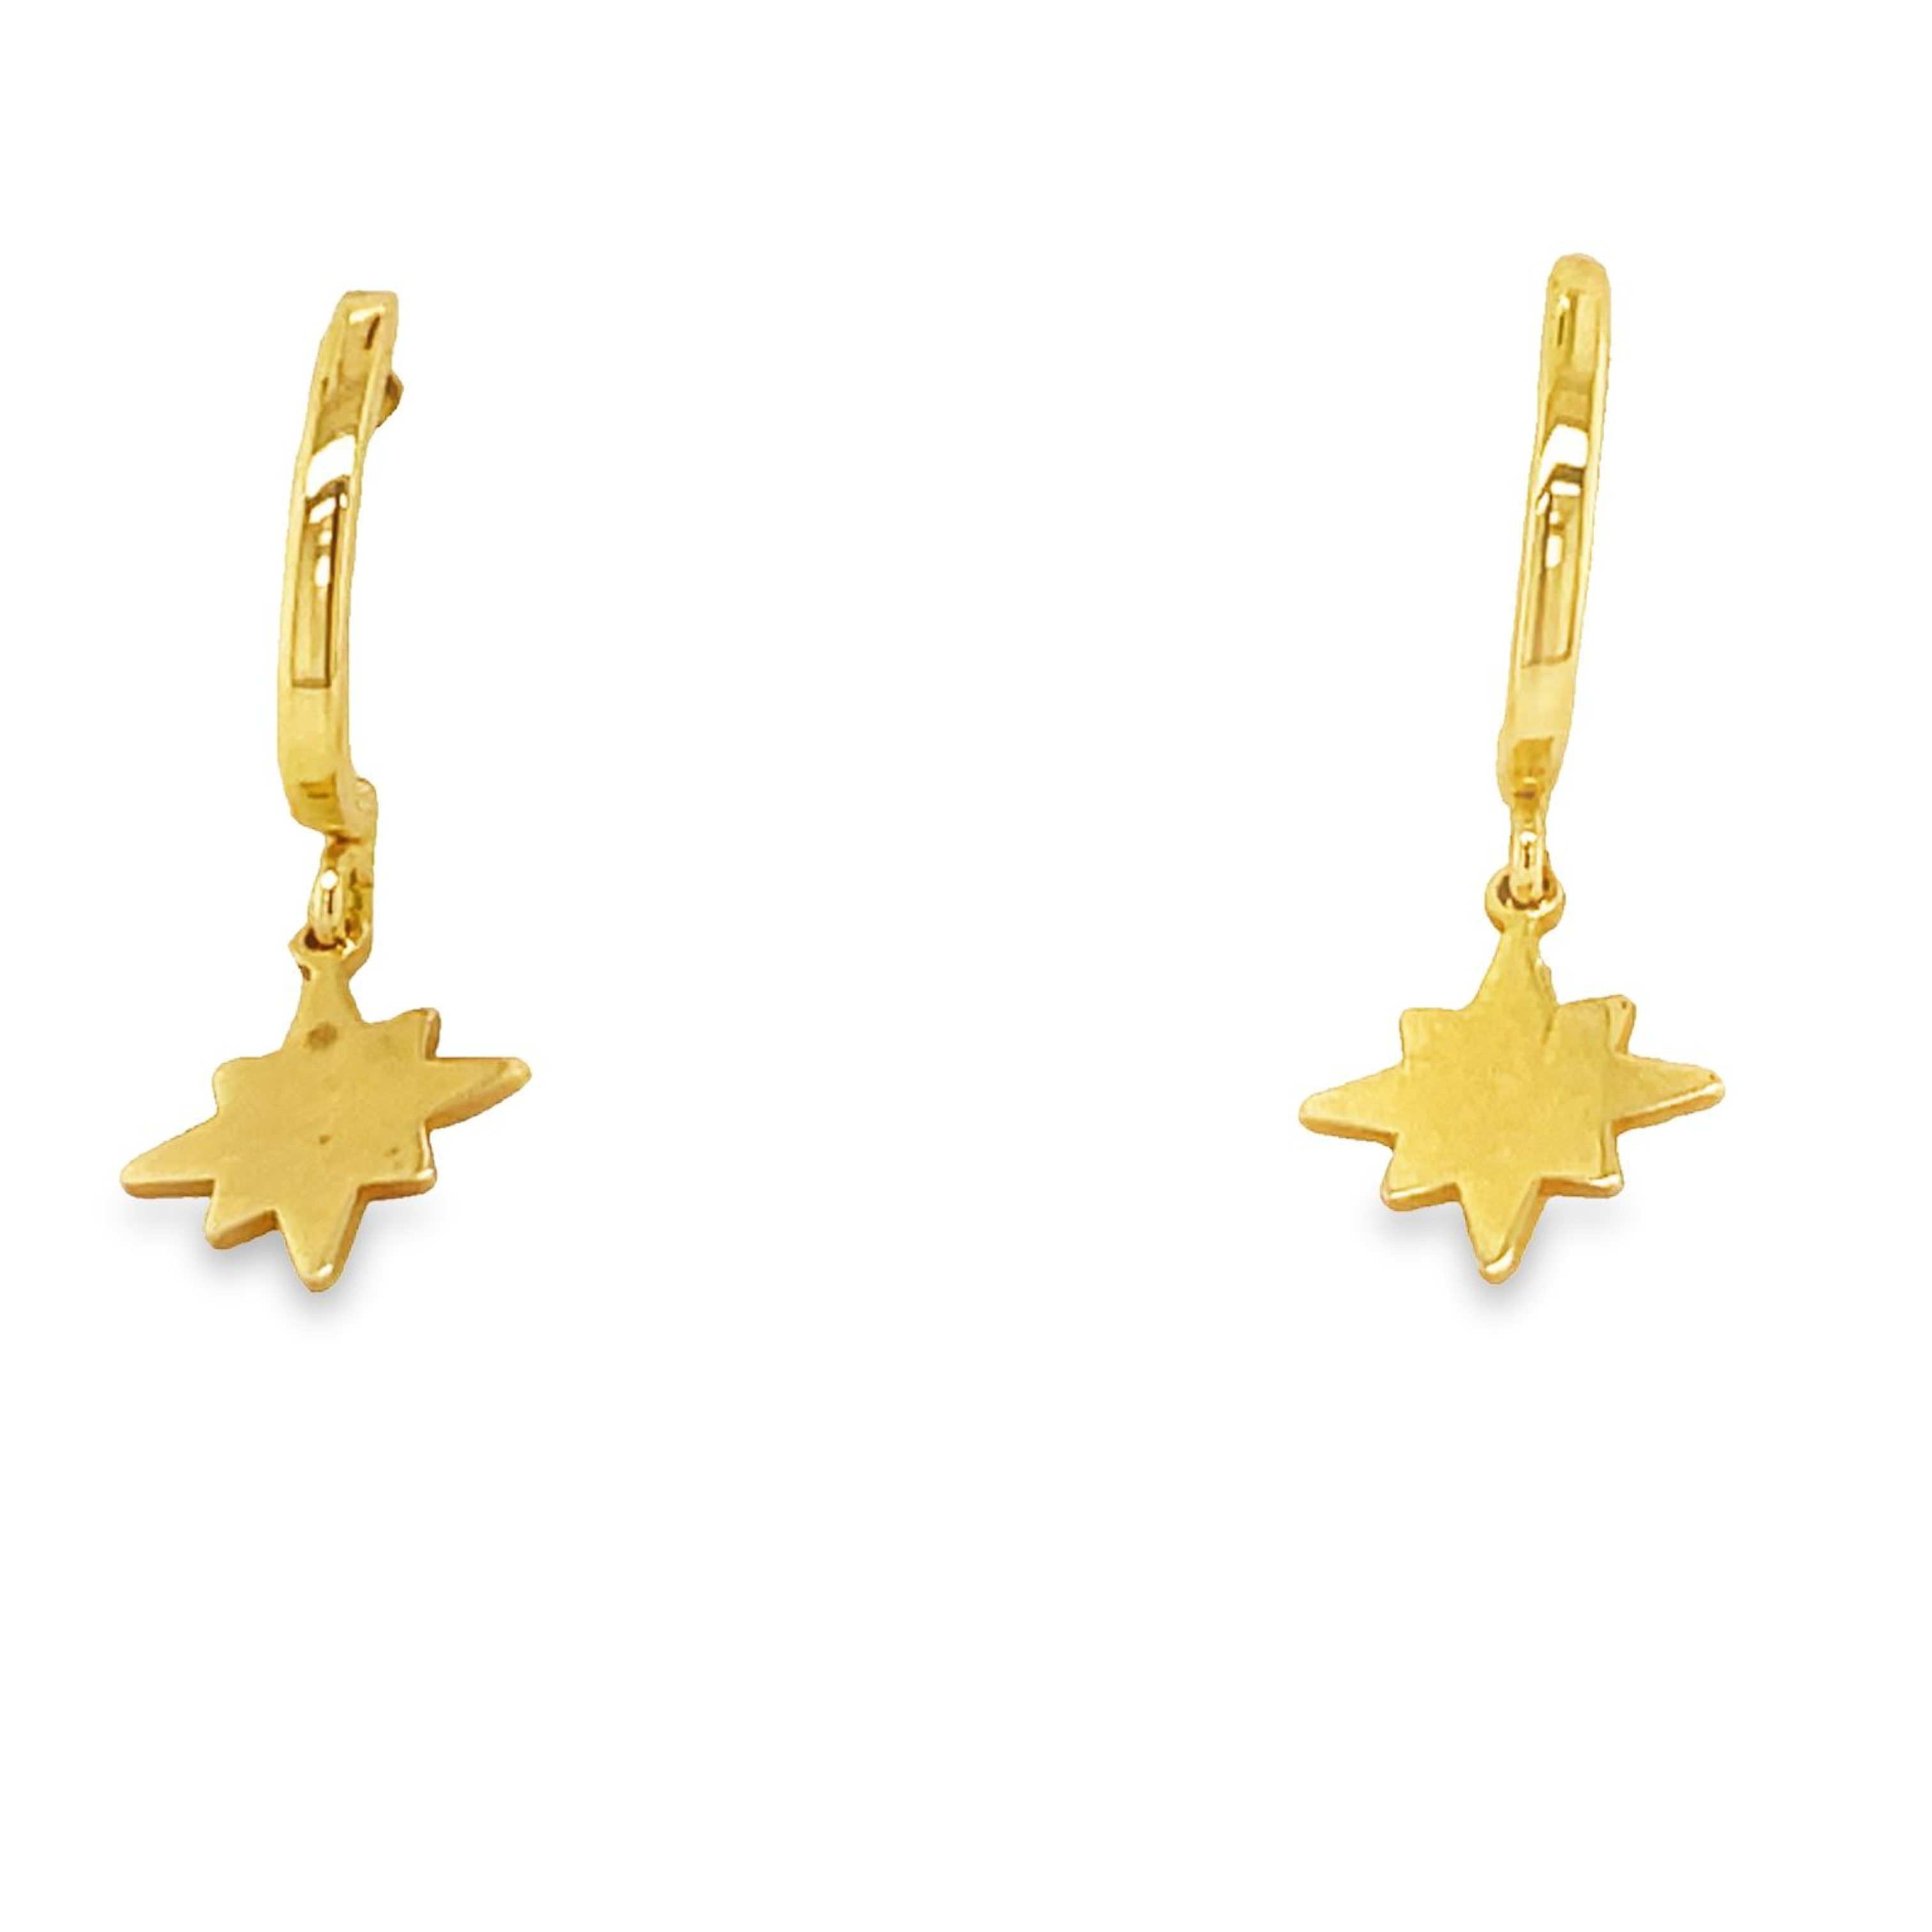 Elegant 14k Gold Dangling Star Baby Earrings with secure friction backs, designed for comfort and superior quality. These earrings feature an enduring 14k Gold construction and are crafted with attention to detail to ensure a safe and comfortable fit.